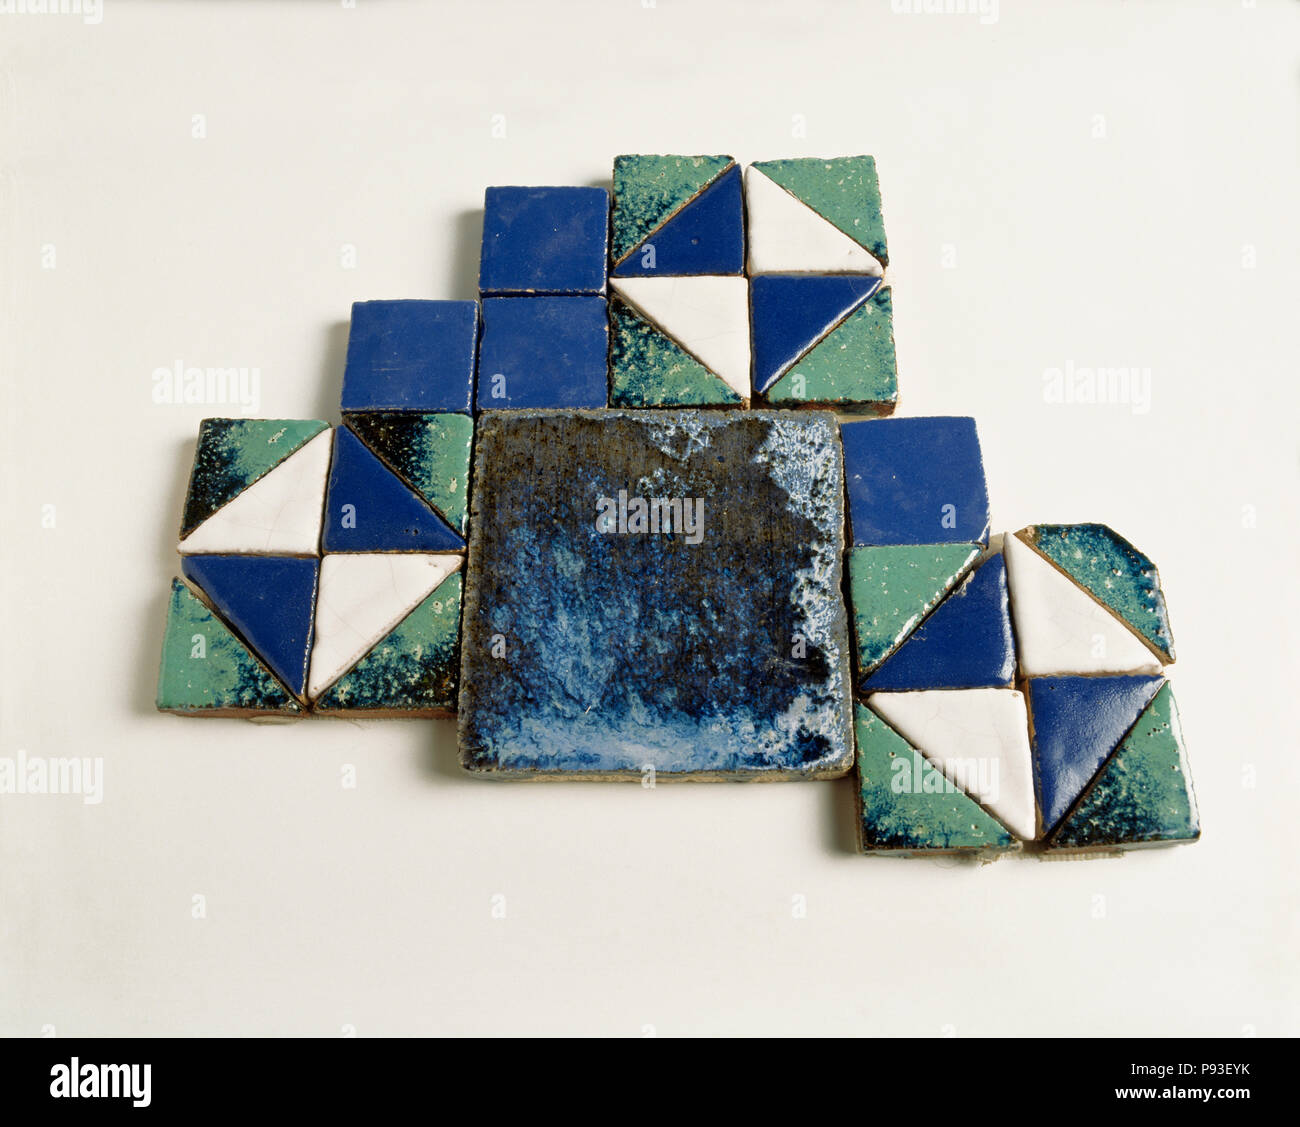 Close-up of blue, green and white mosaic ceramic tiles Stock Photo